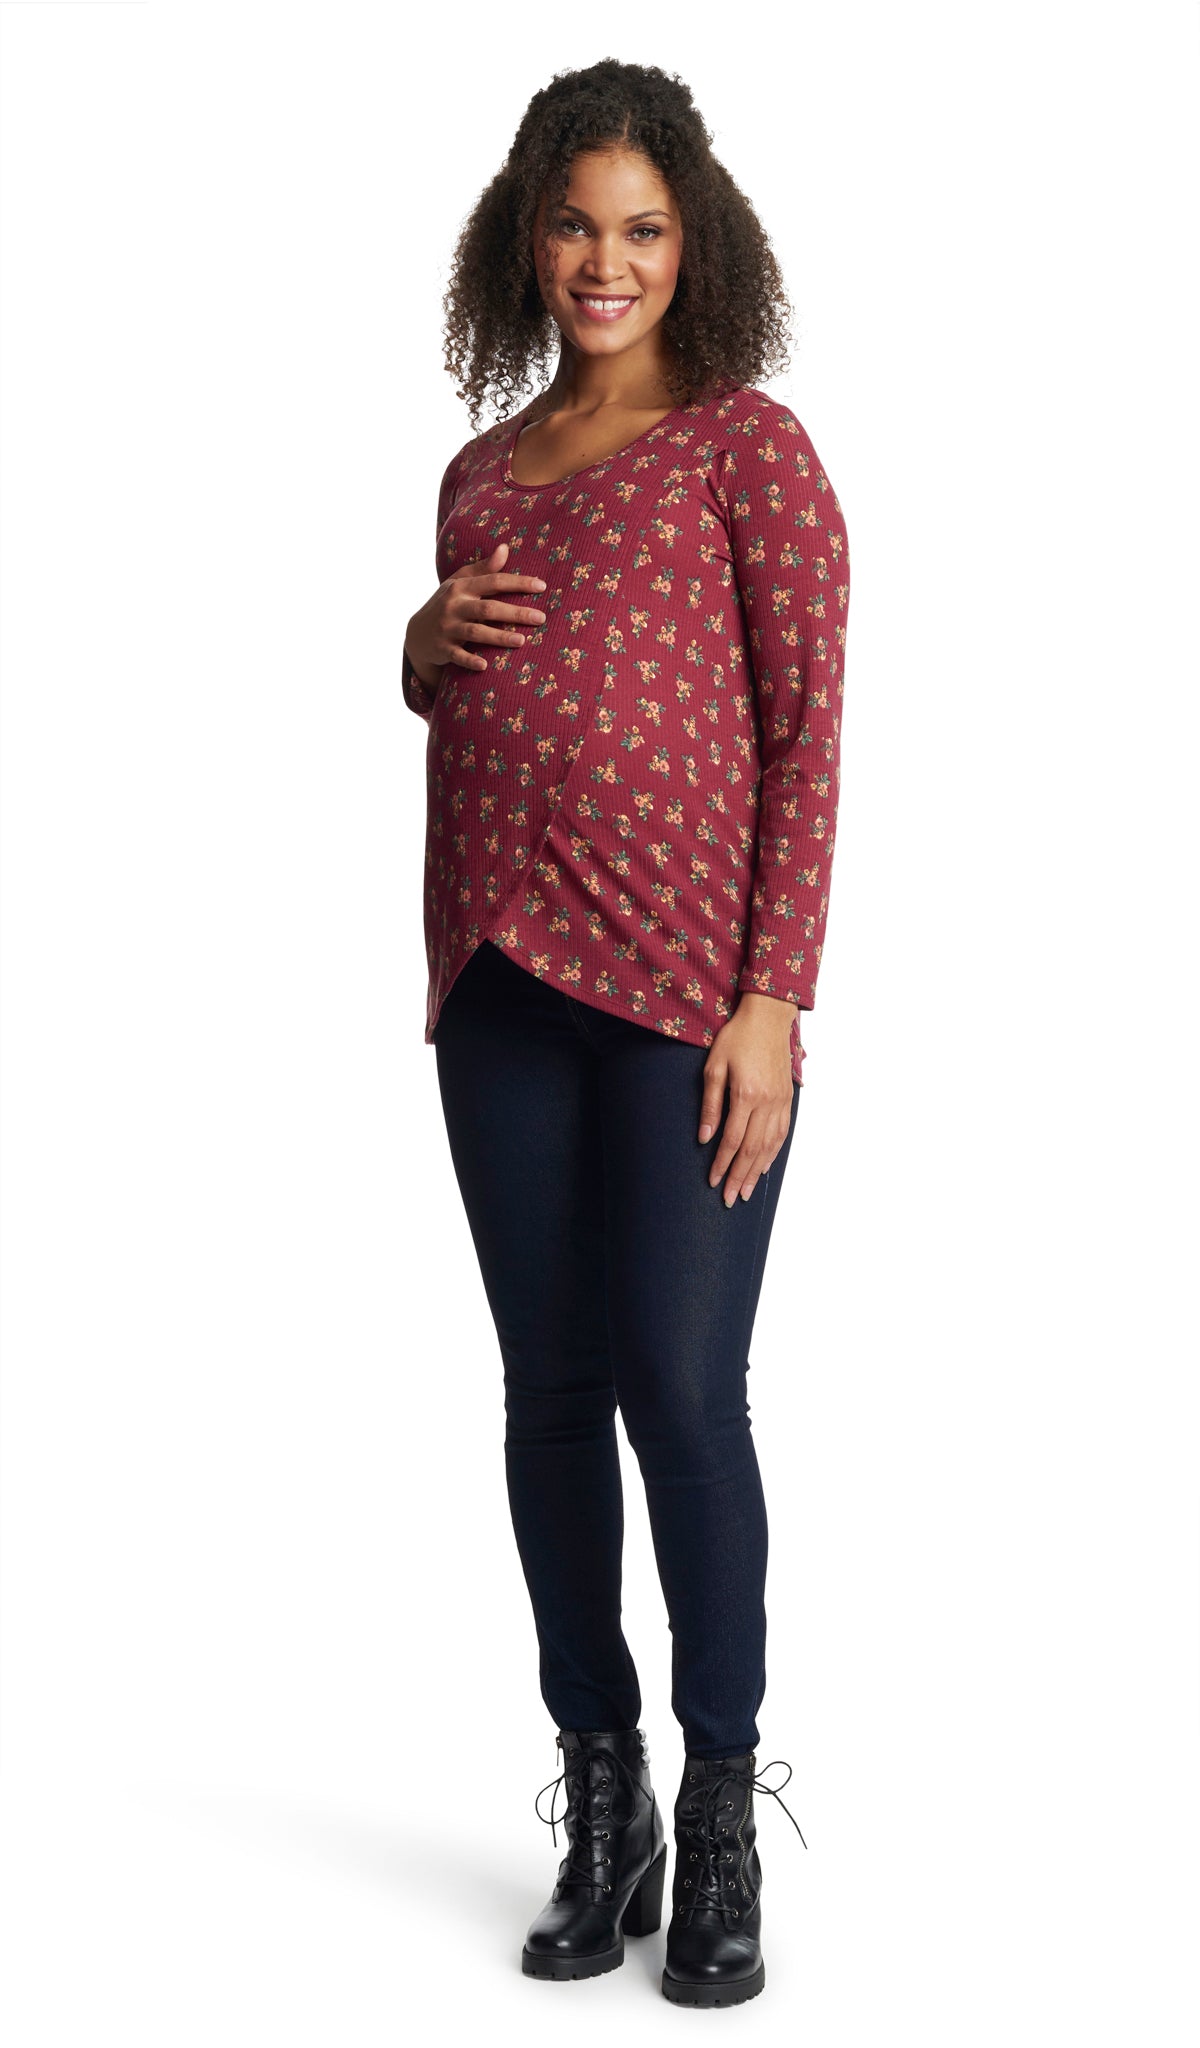 Burgundy Ditsy Adriana top worn in full length shot by pregnant woman with dark denim jeans and black boots and with one hand on her belly.